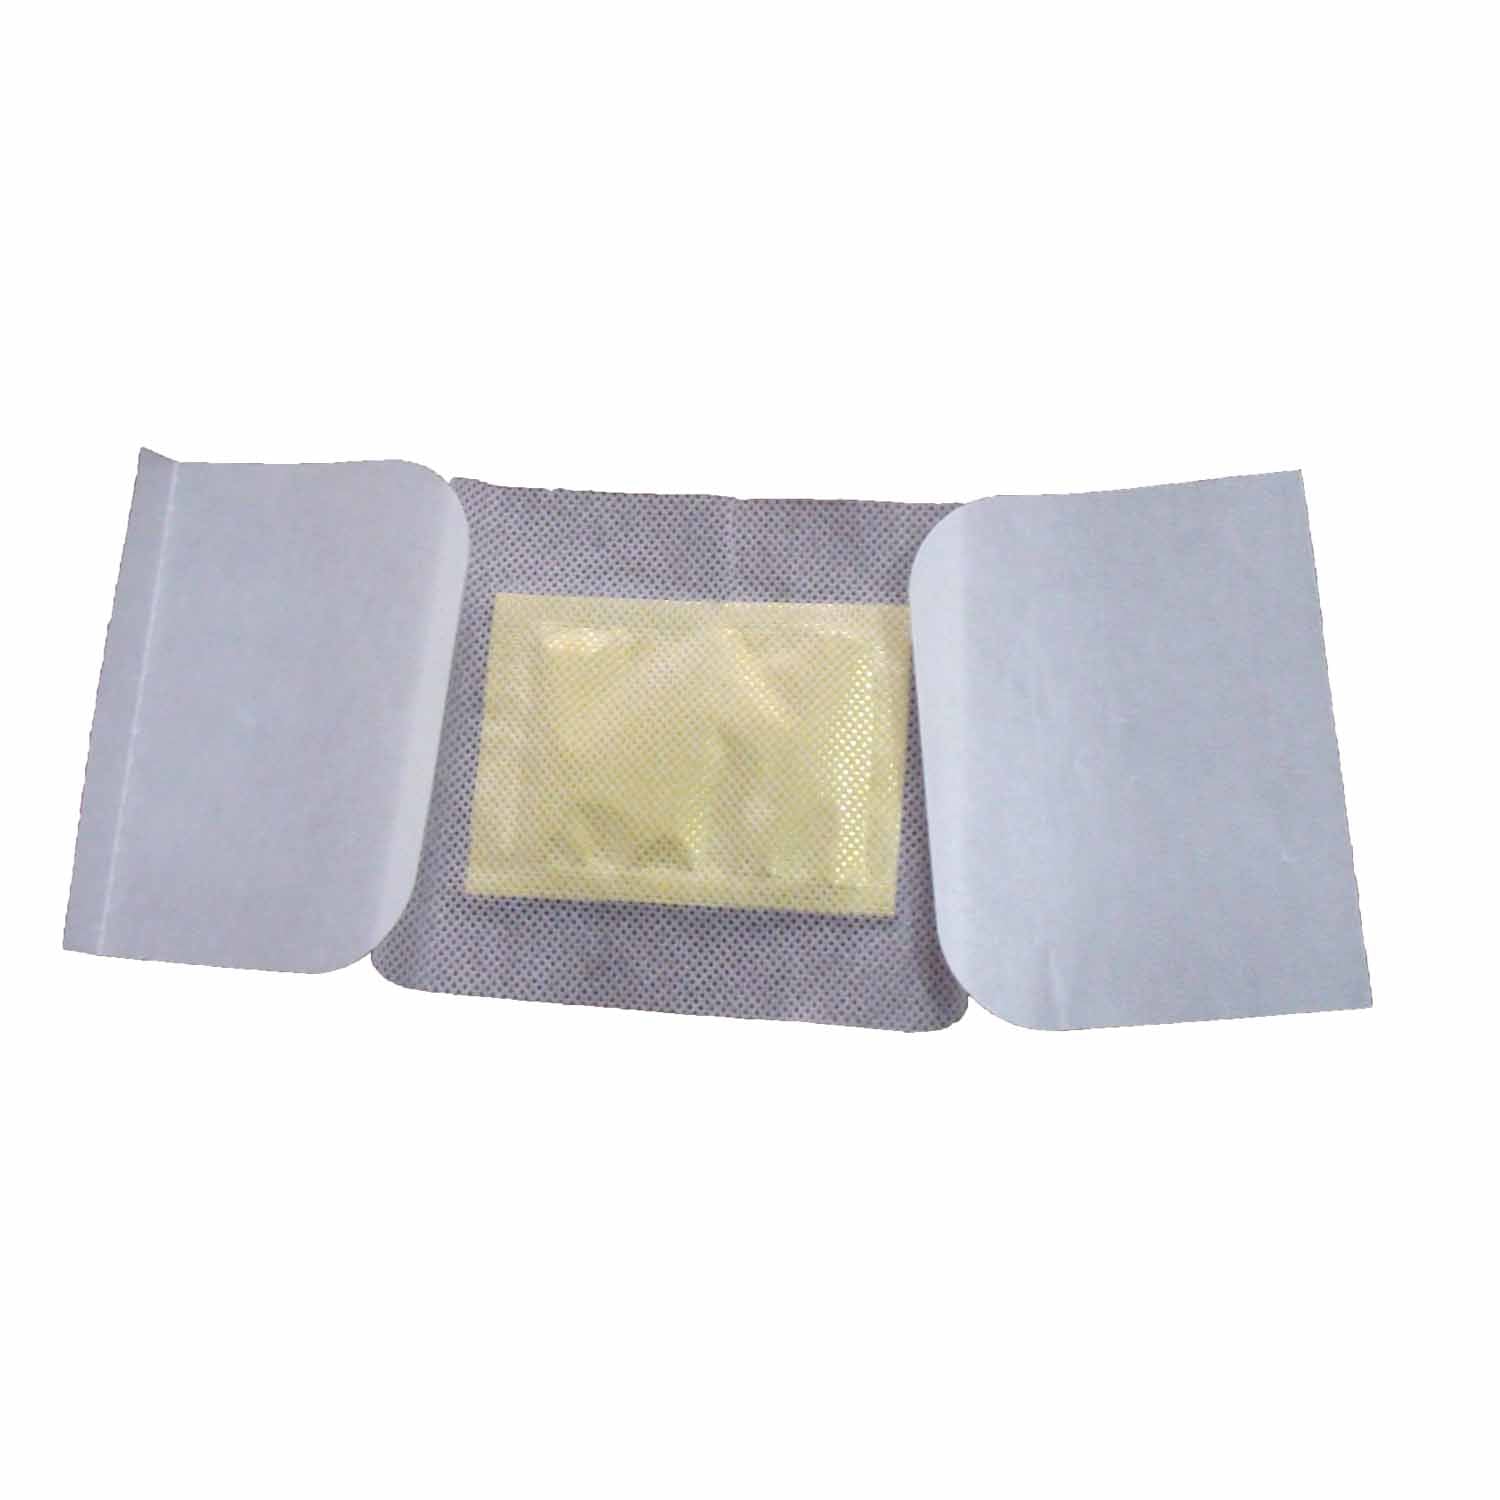 New Coming Multifunctional Detox Foot Pads Chinese Medicine Patches With Adhesive Organic Herbal Cleansing Patch 10Pcs